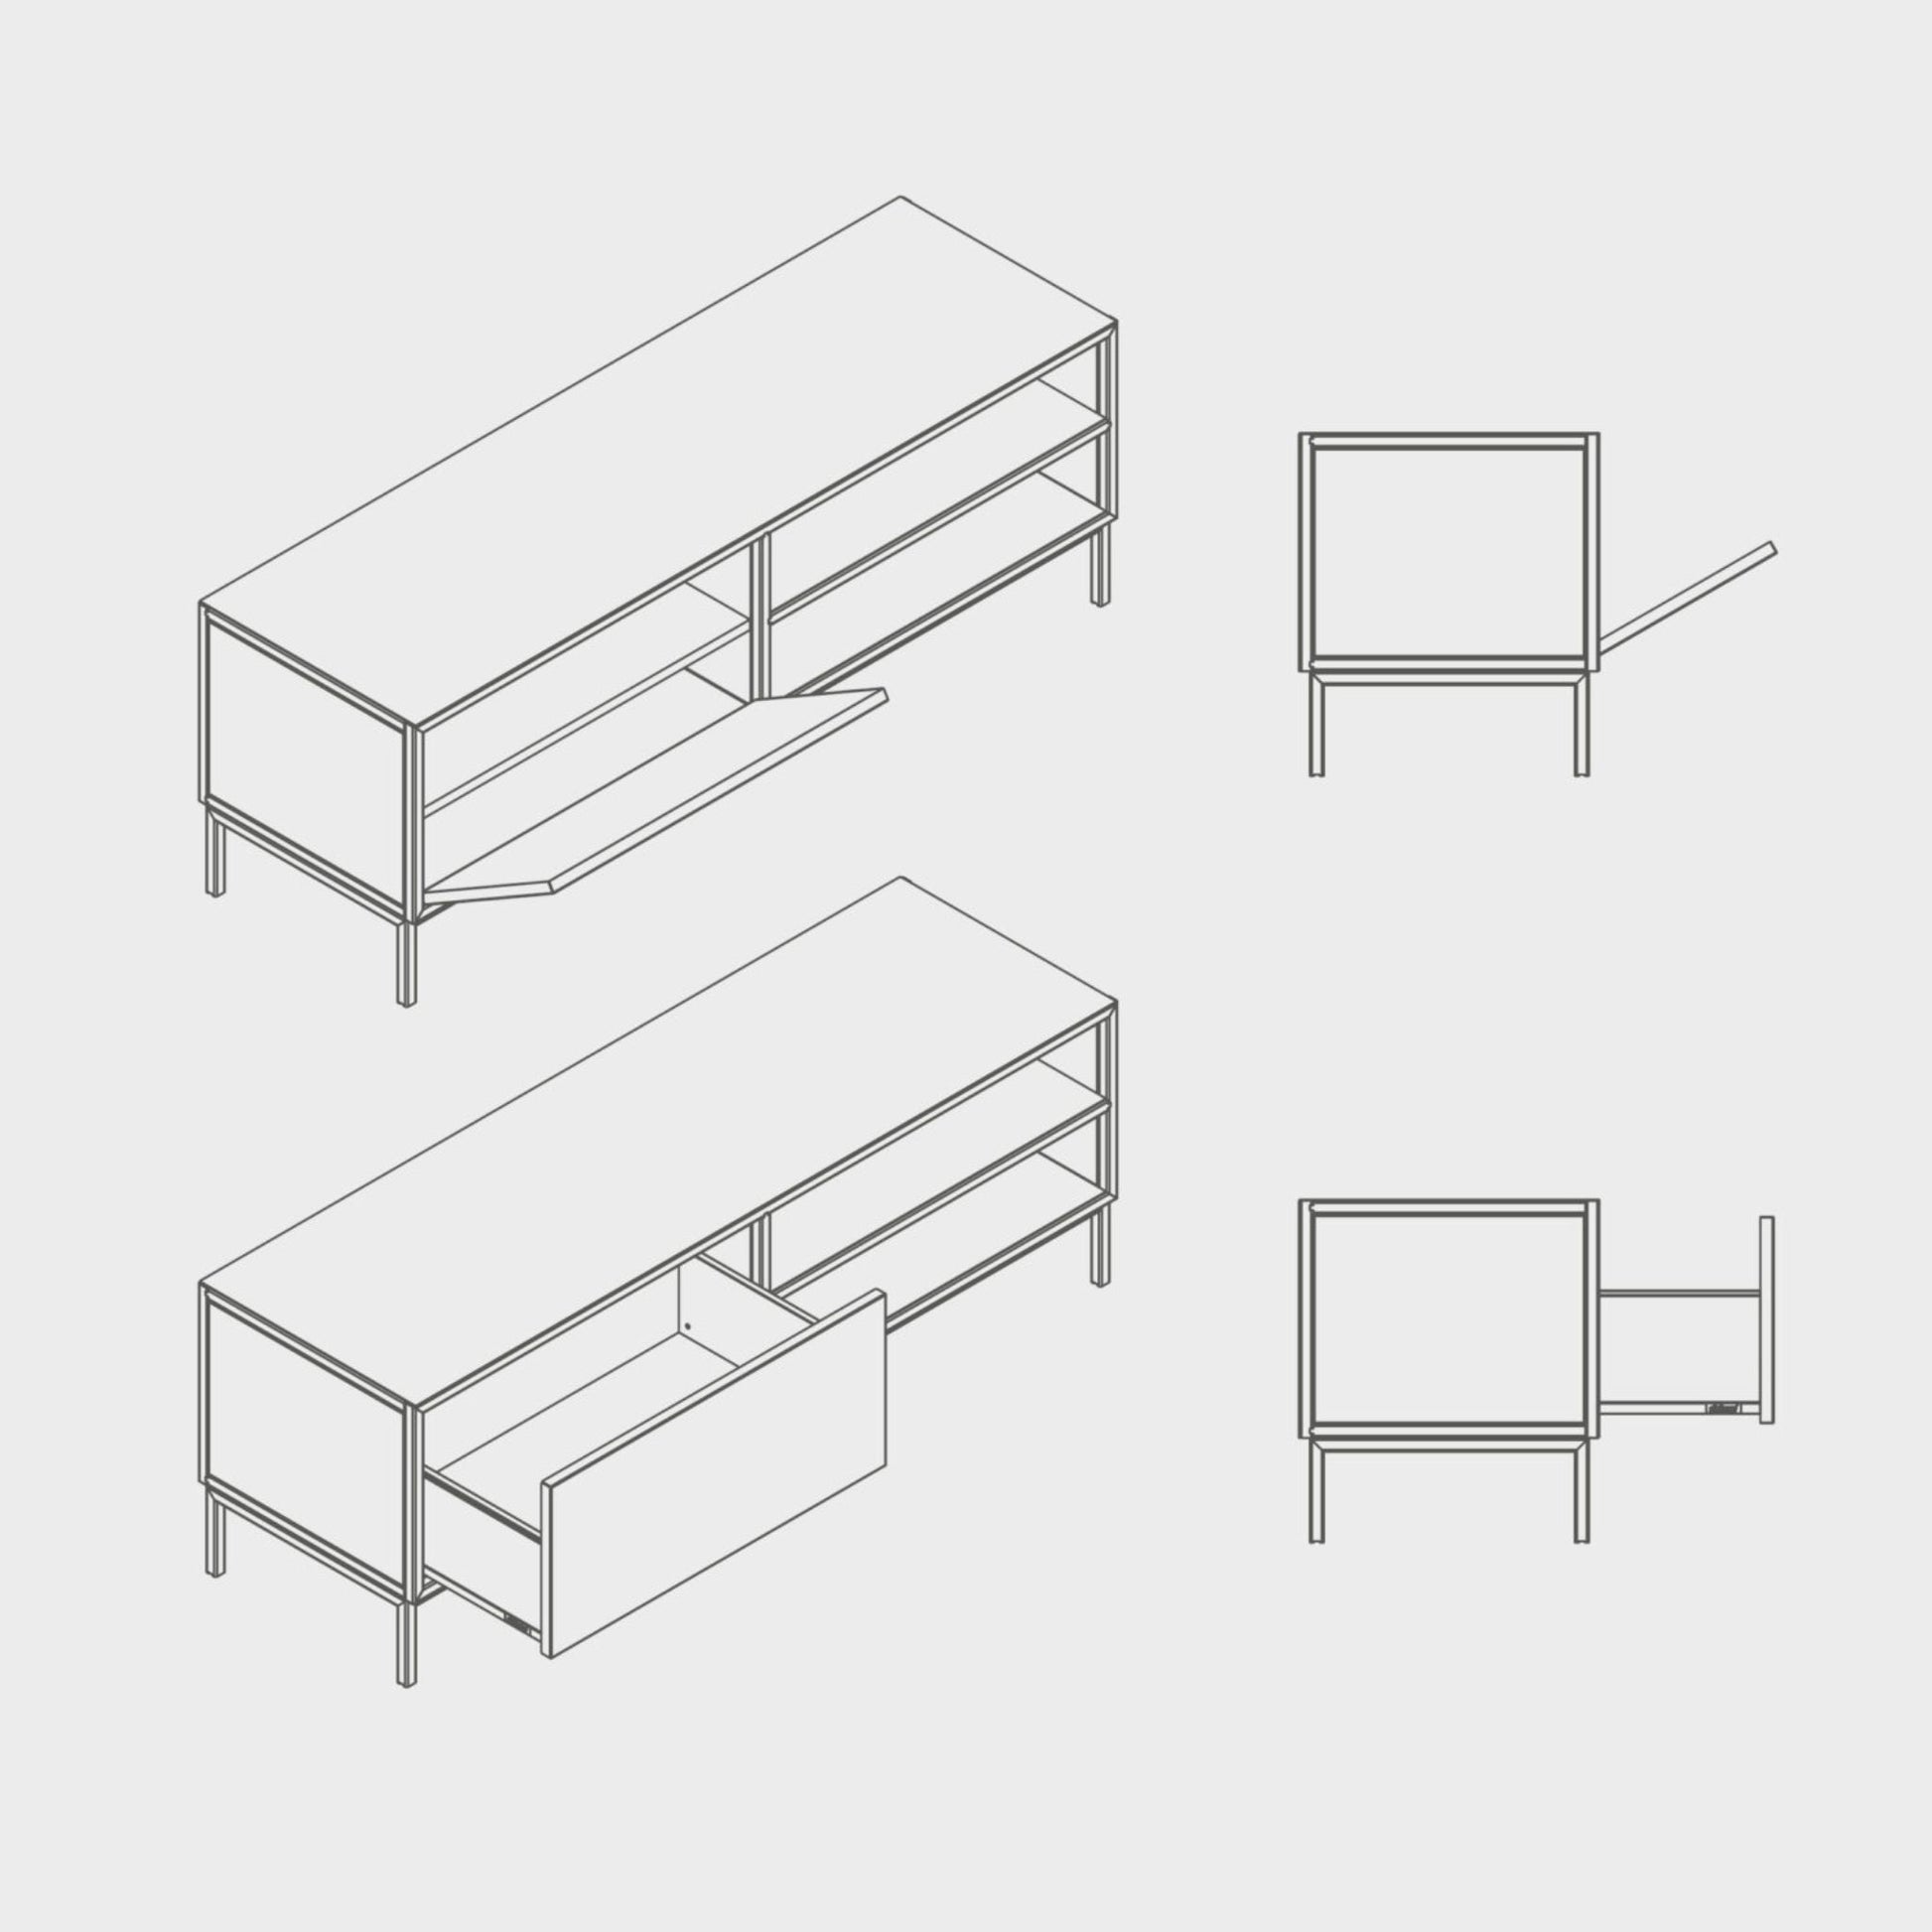 Technical drawing of the Sarine Lowboard in powder-coated steel, elegant and modern piece of furniture for your living room